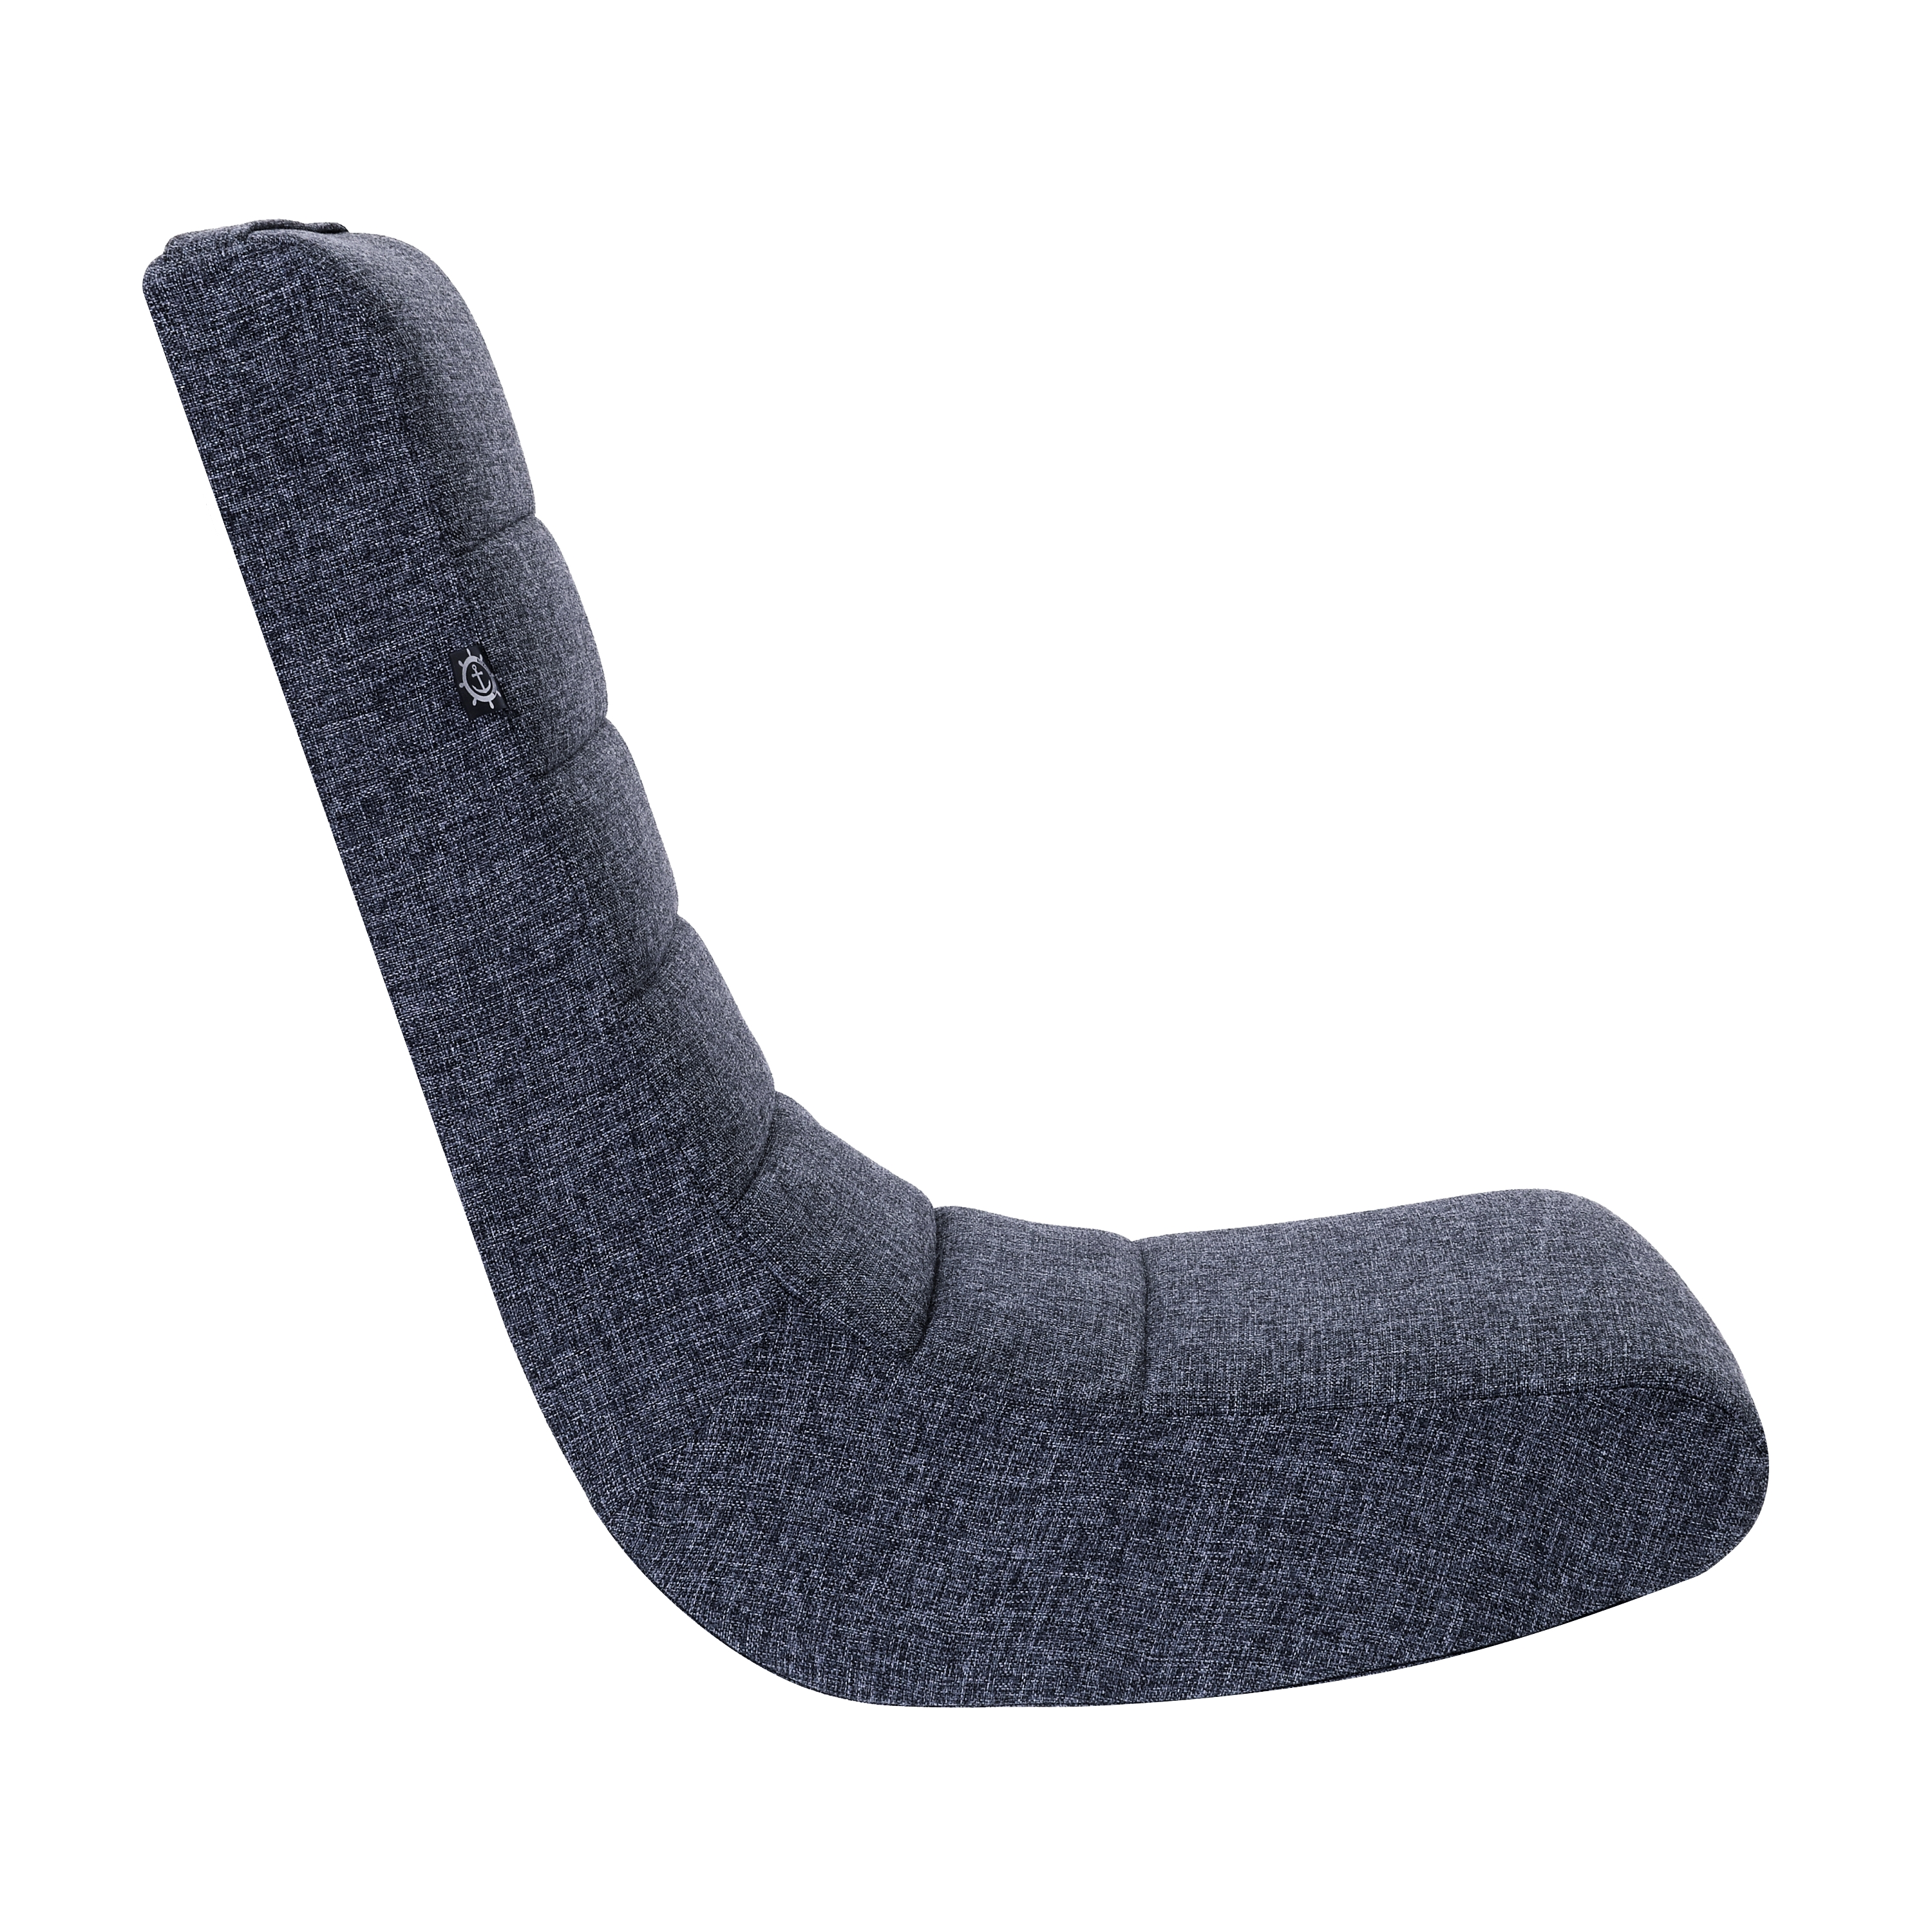 The Crew Furniture Classic Video Rocker Floor Gaming Chair, Kids and Teens, Polyester Linen, Gray - image 5 of 9